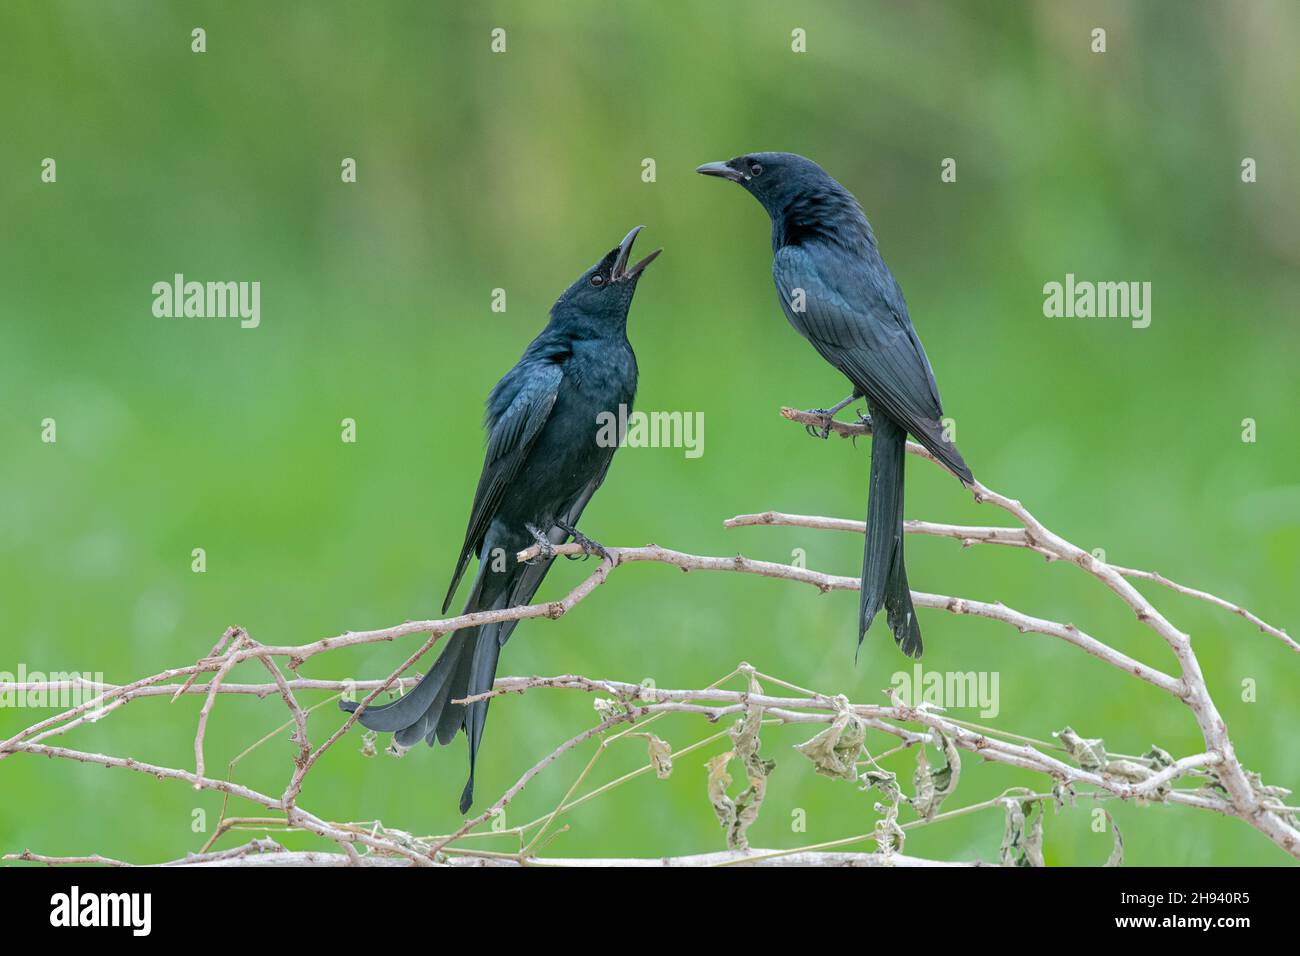 The black drongo (Dicrurus macrocercus) is a small Asian passerine bird of the drongo family Dicruridae. It is a common resident breeder in much of tr Stock Photo